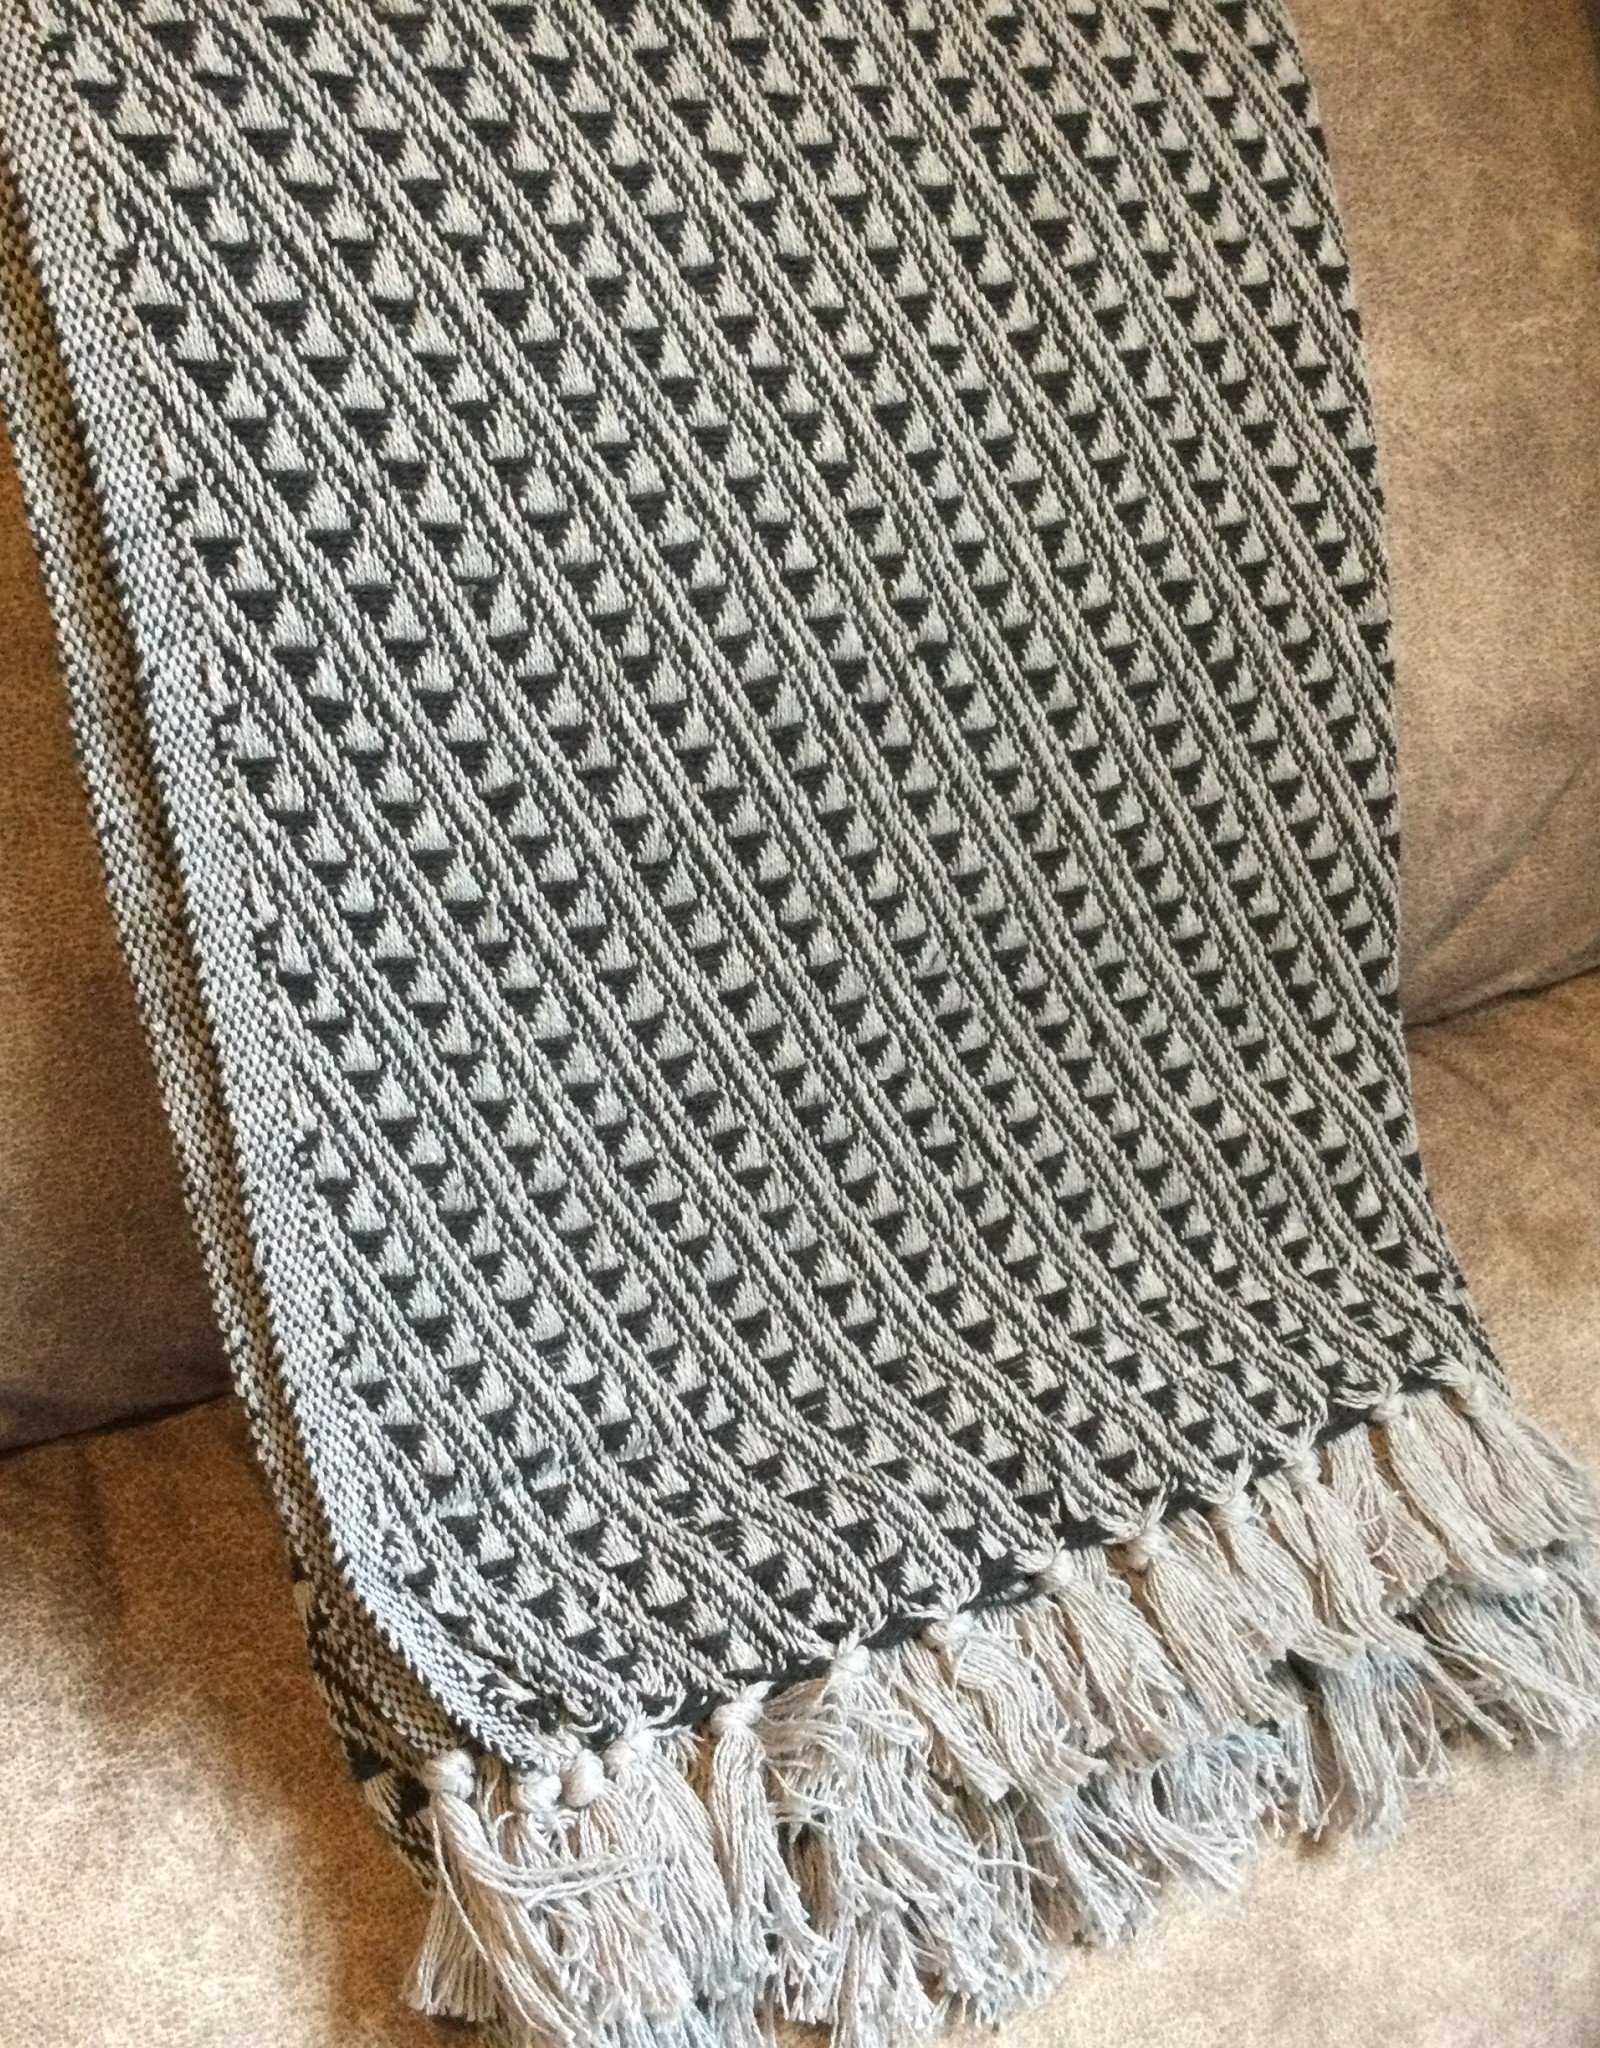 Blanket, Patterned Cotton Throw